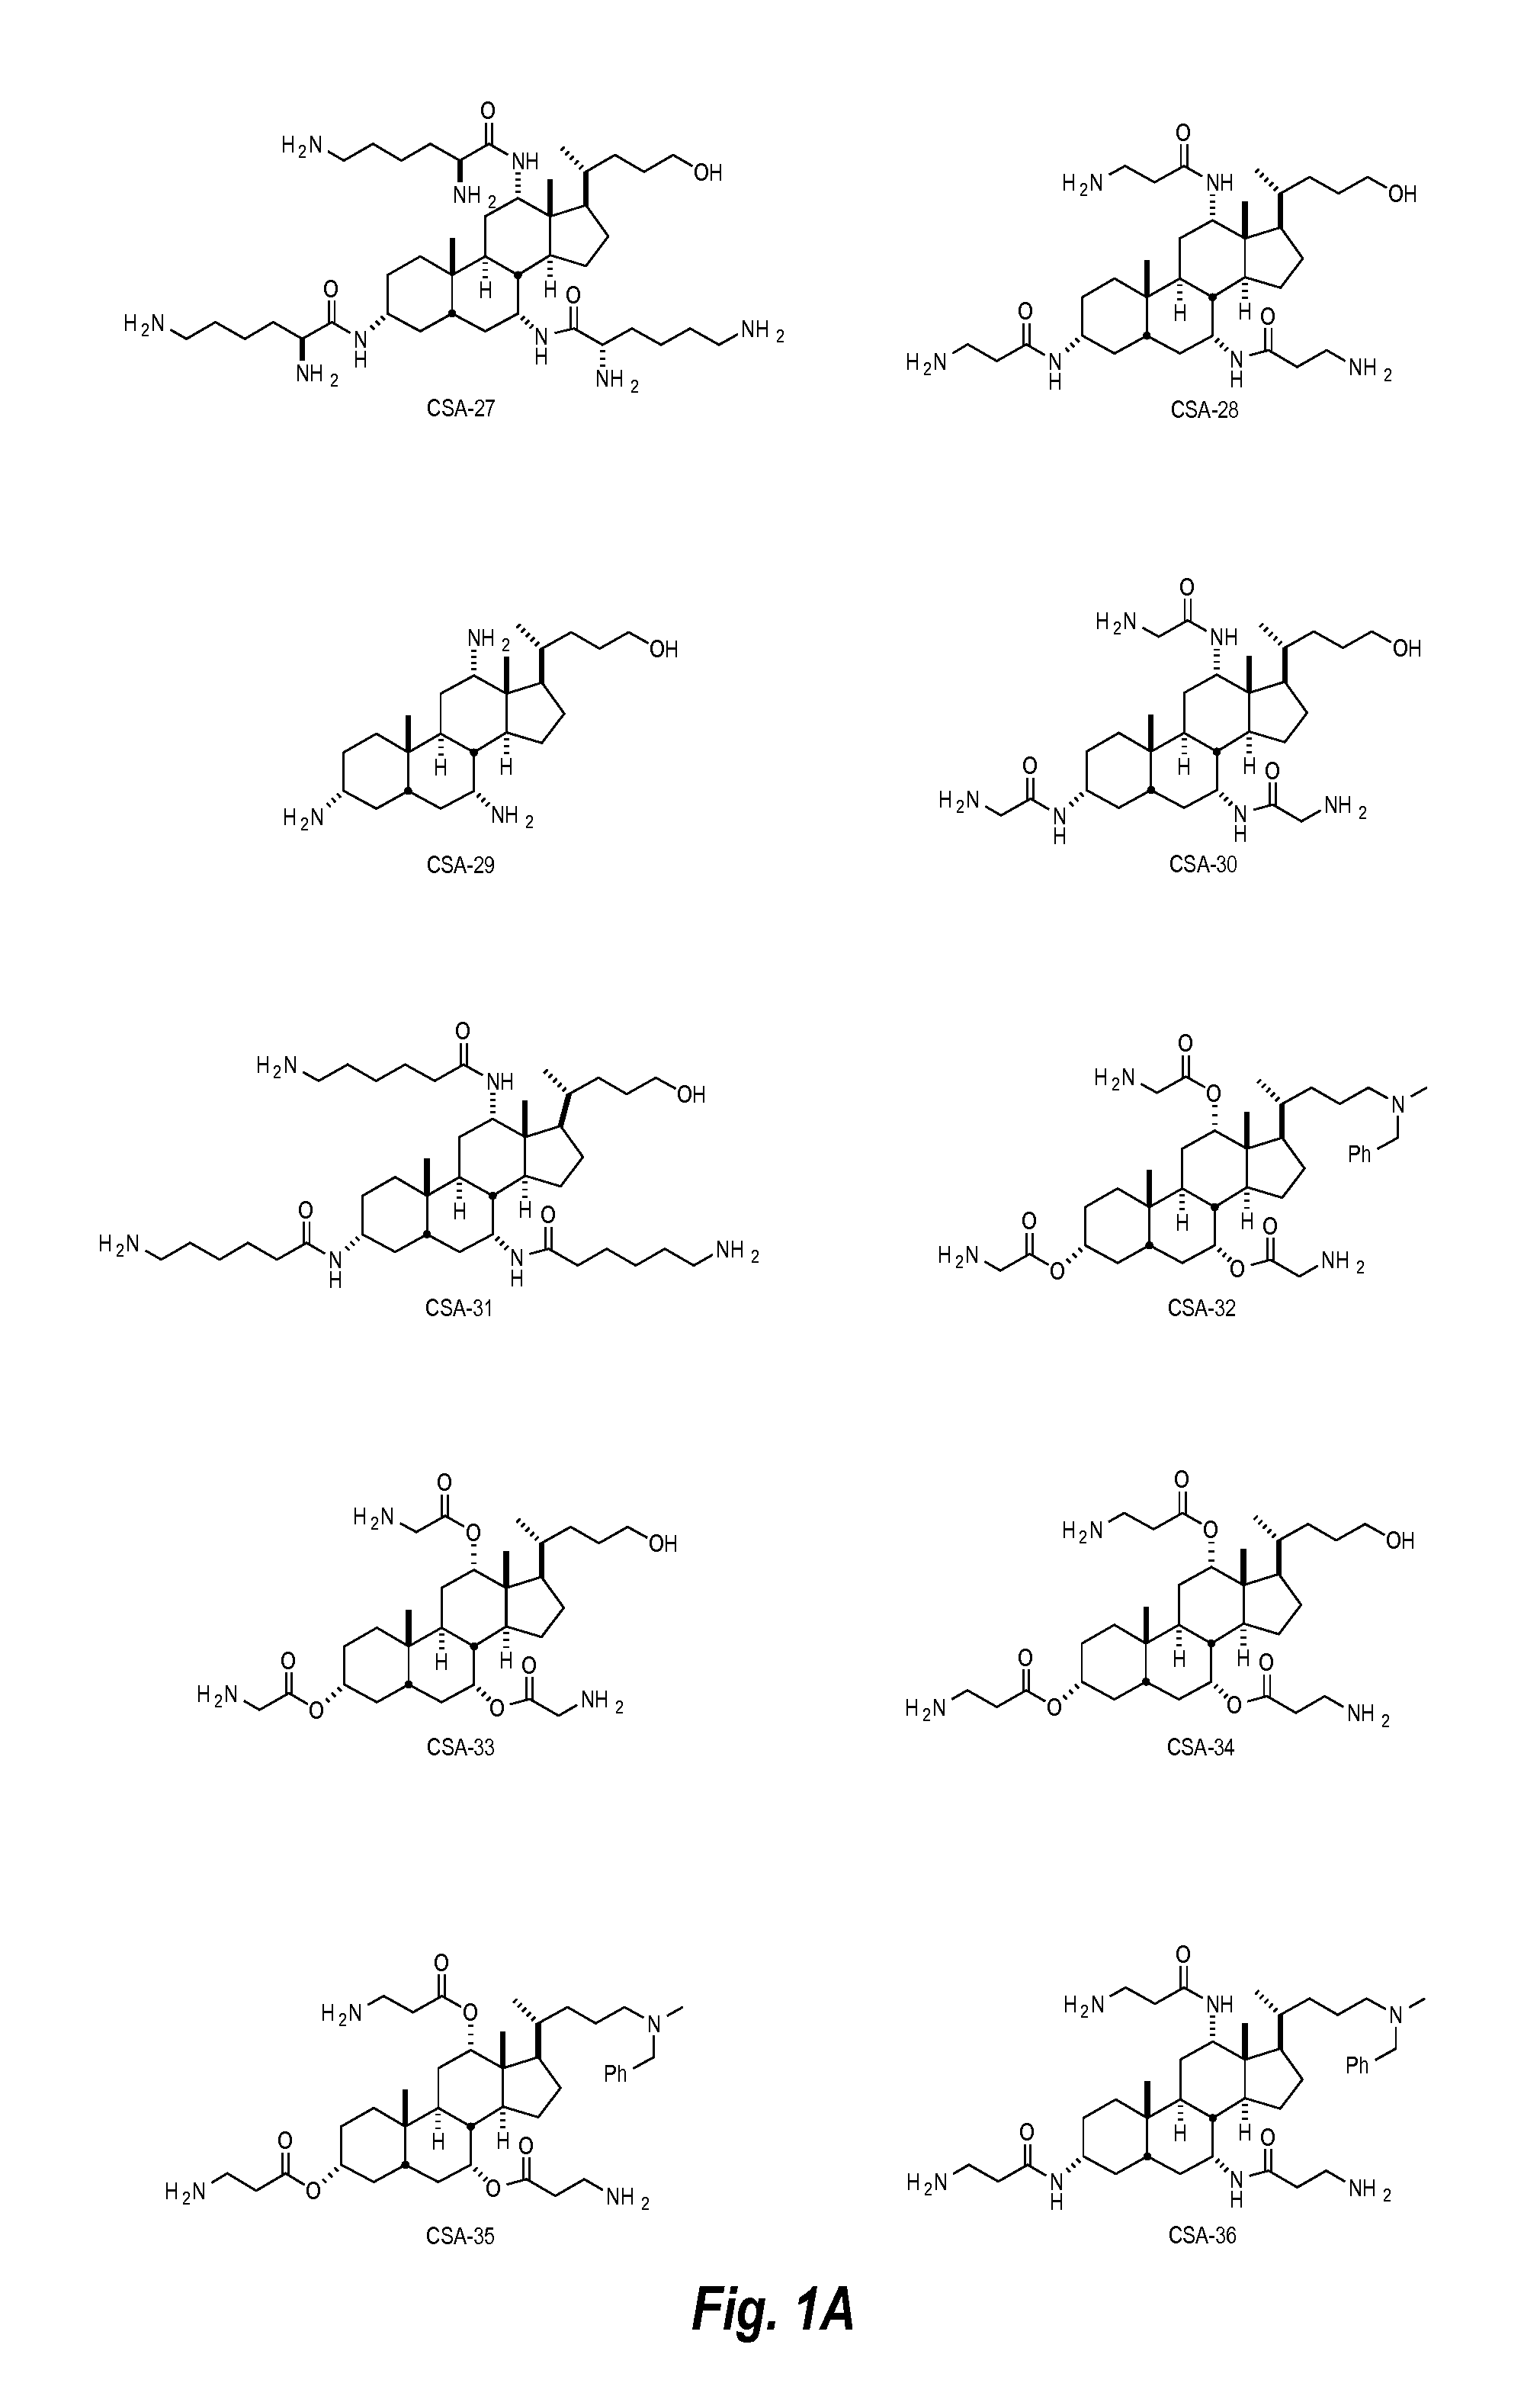 Anti-microbial food processing compositions including ceragenin compounds and methods of use